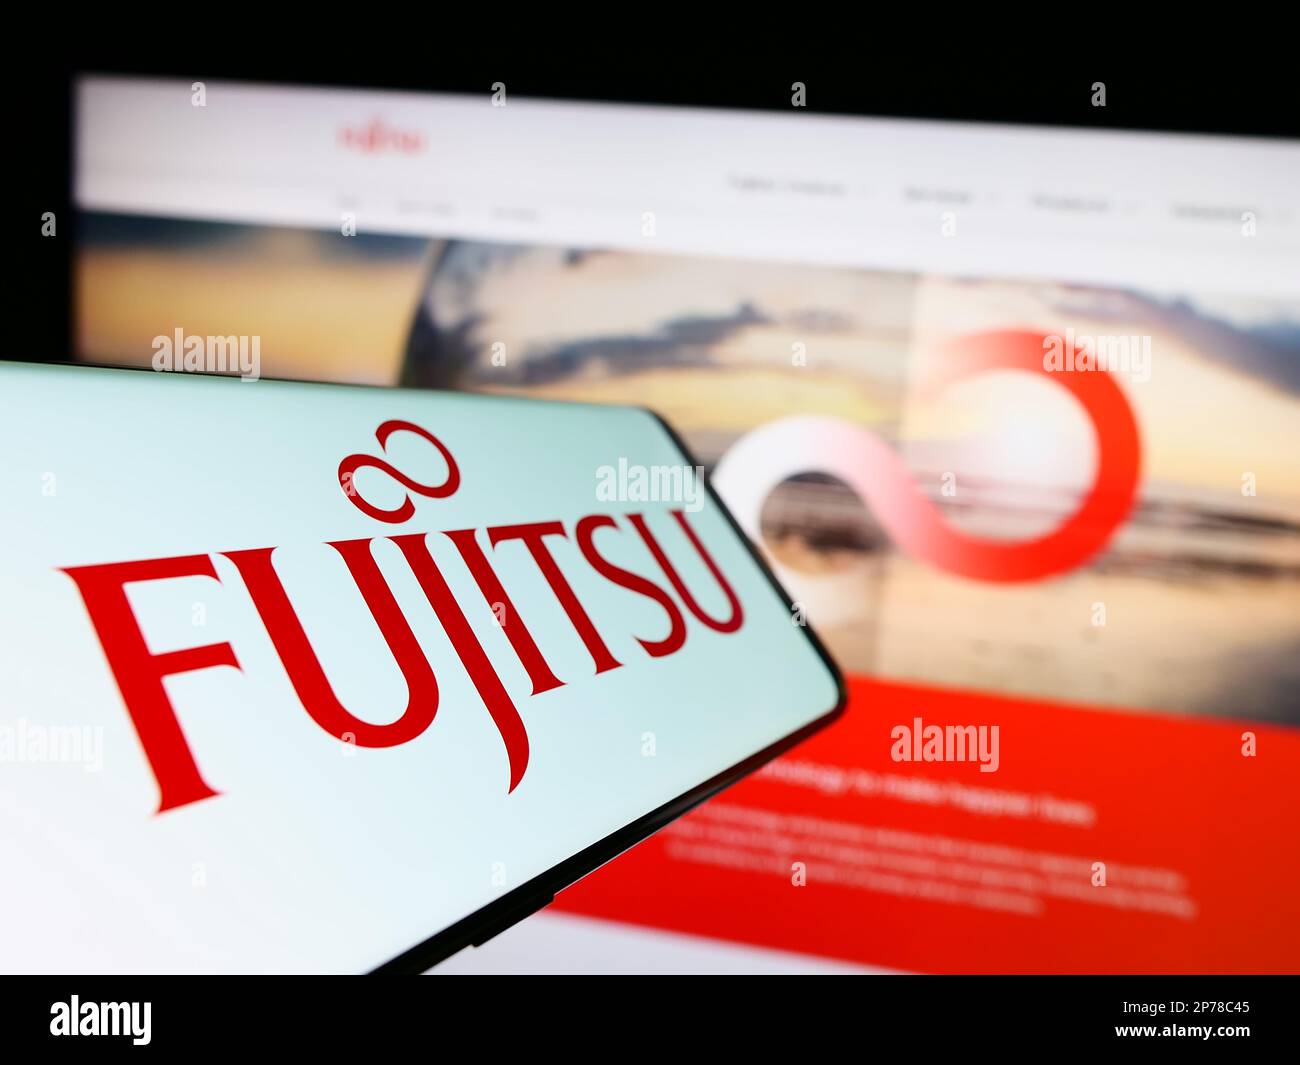 Mobile phone with logo of Japanese ICT company Fujitsu Limited on screen in front of business website. Focus on center-left of phone display. Stock Photo